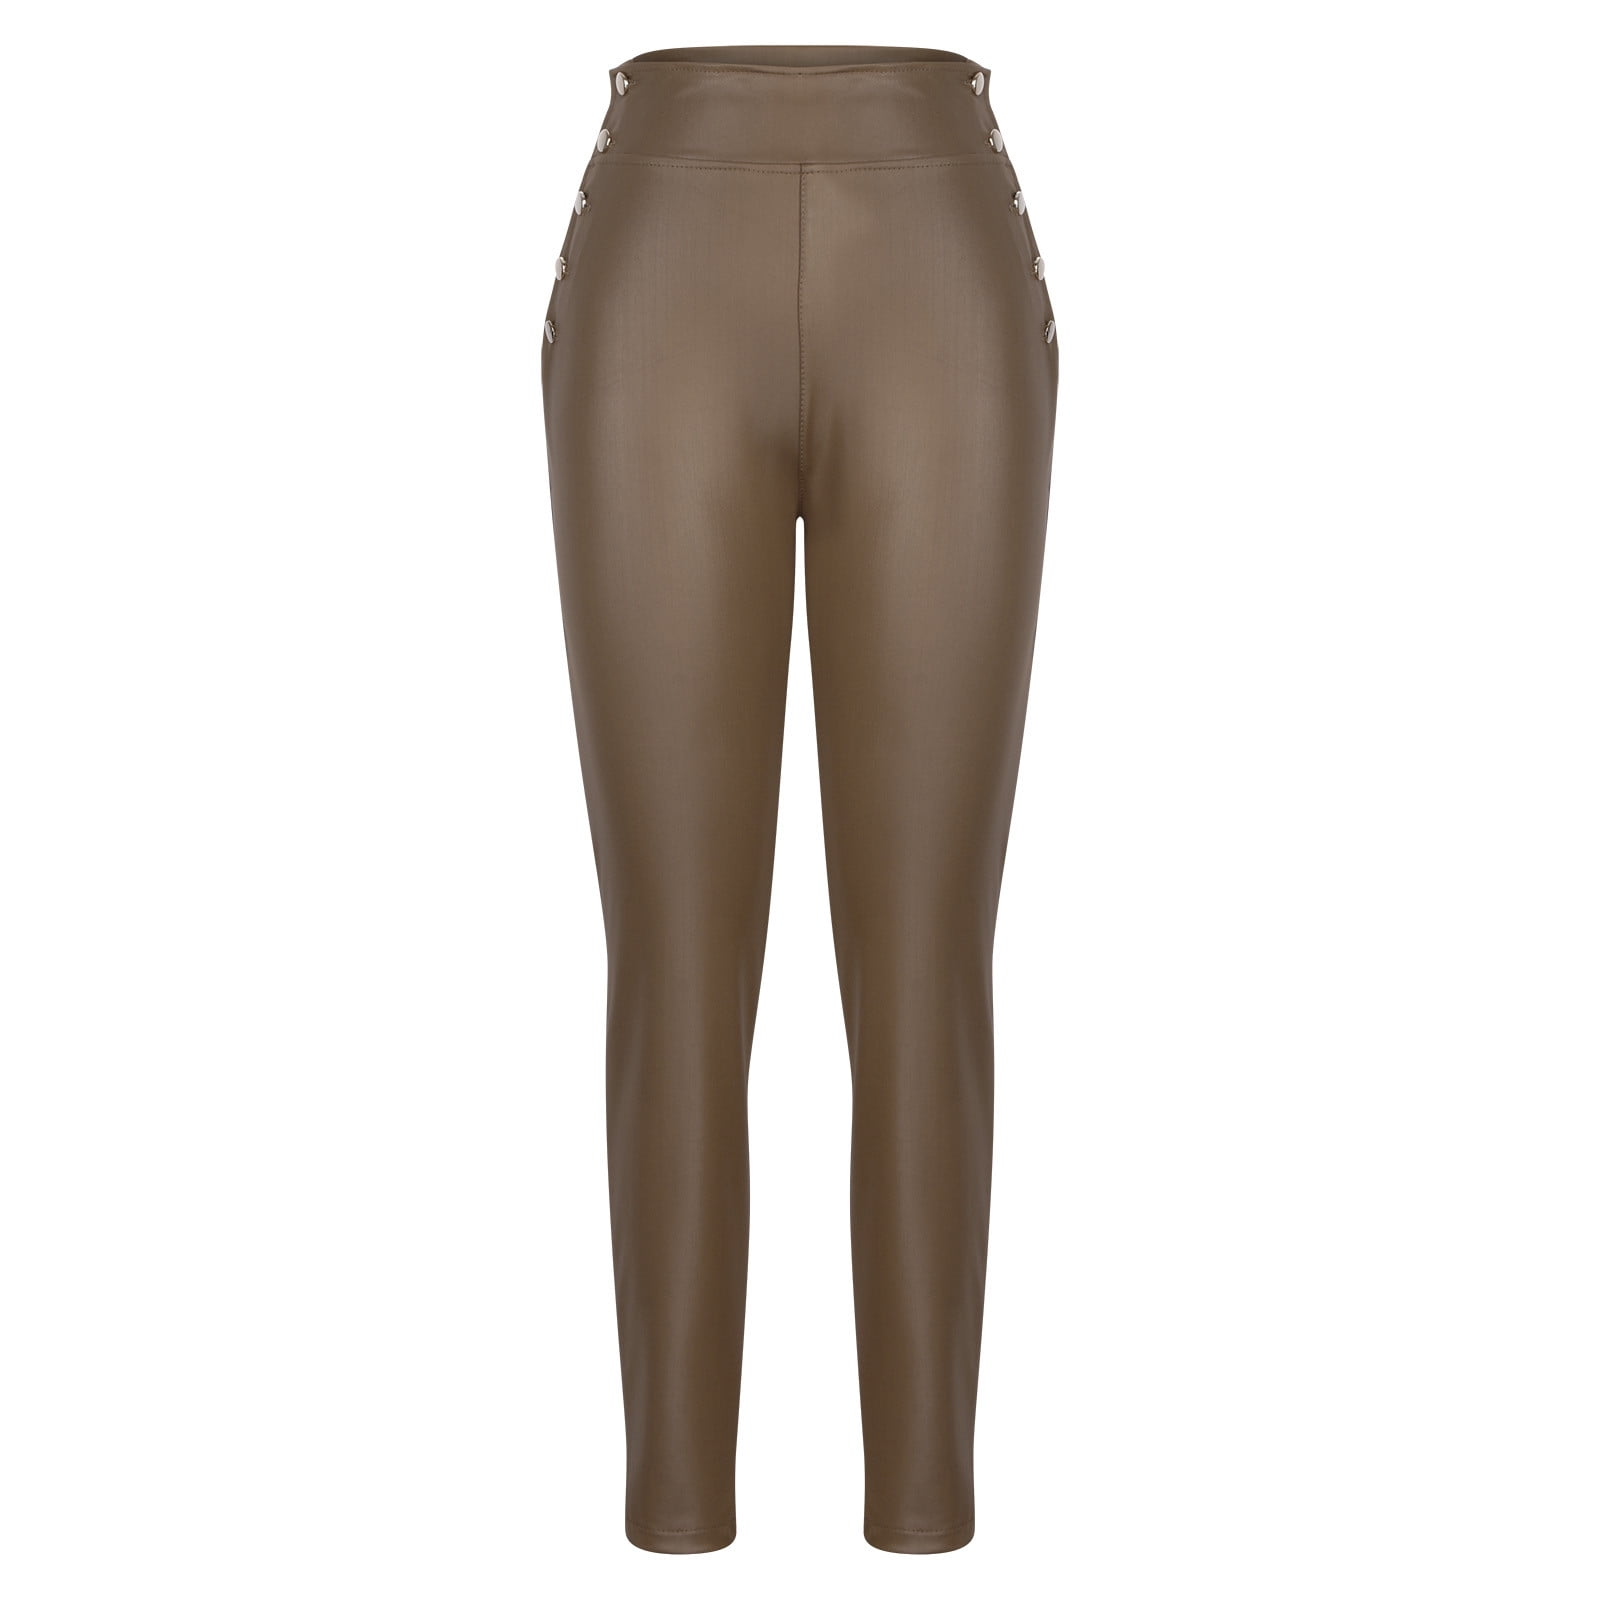 Pu Leather Pants for Women Sexy Tight Stretchy High Waist Button